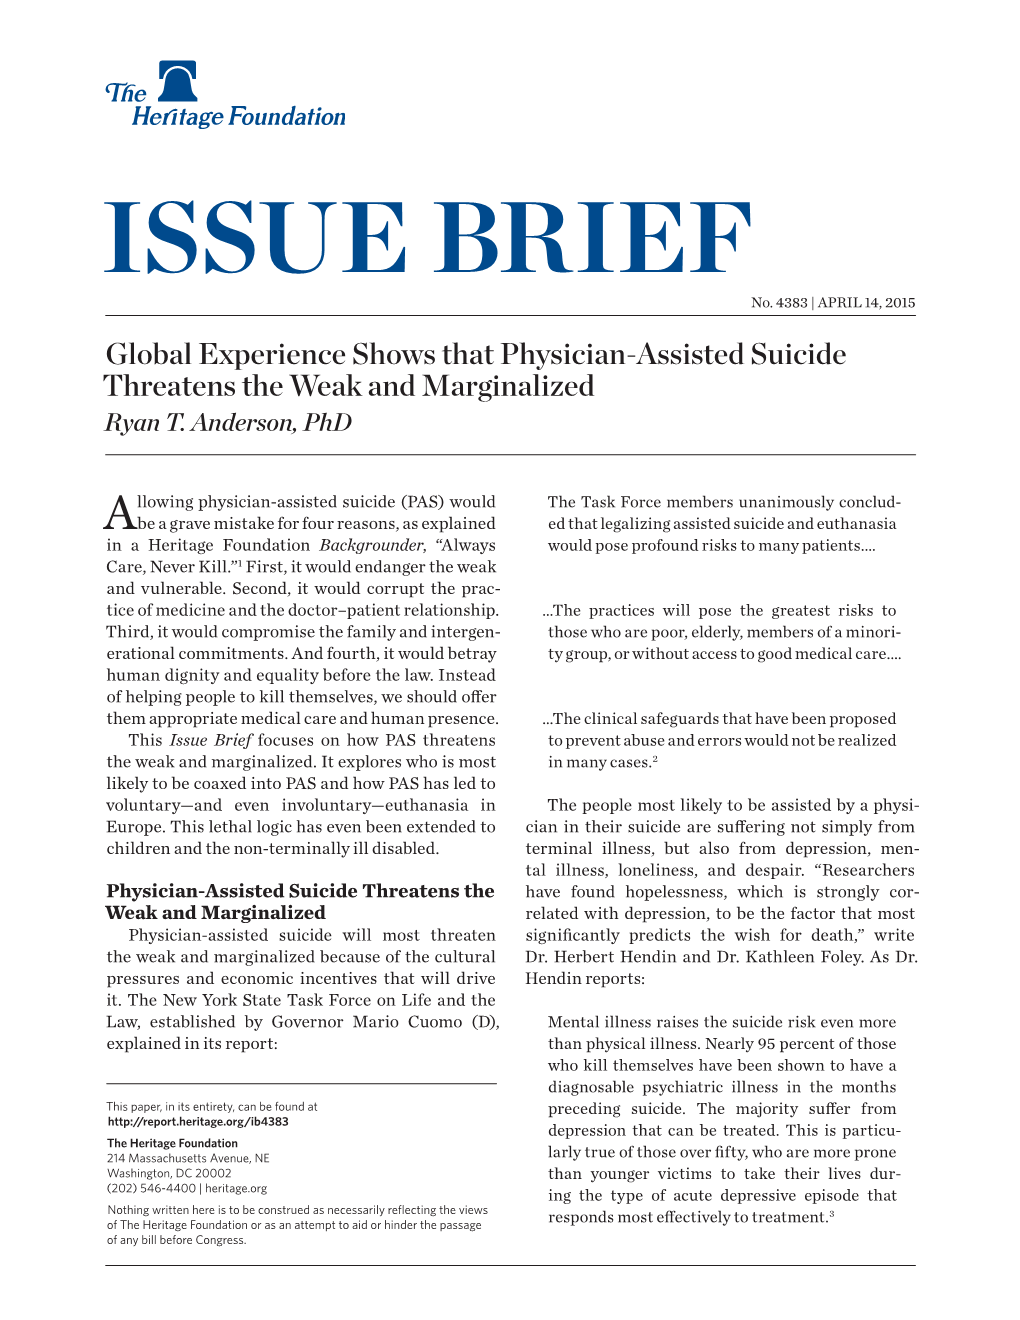 Global Experience Shows Physician-Assisted Suicide